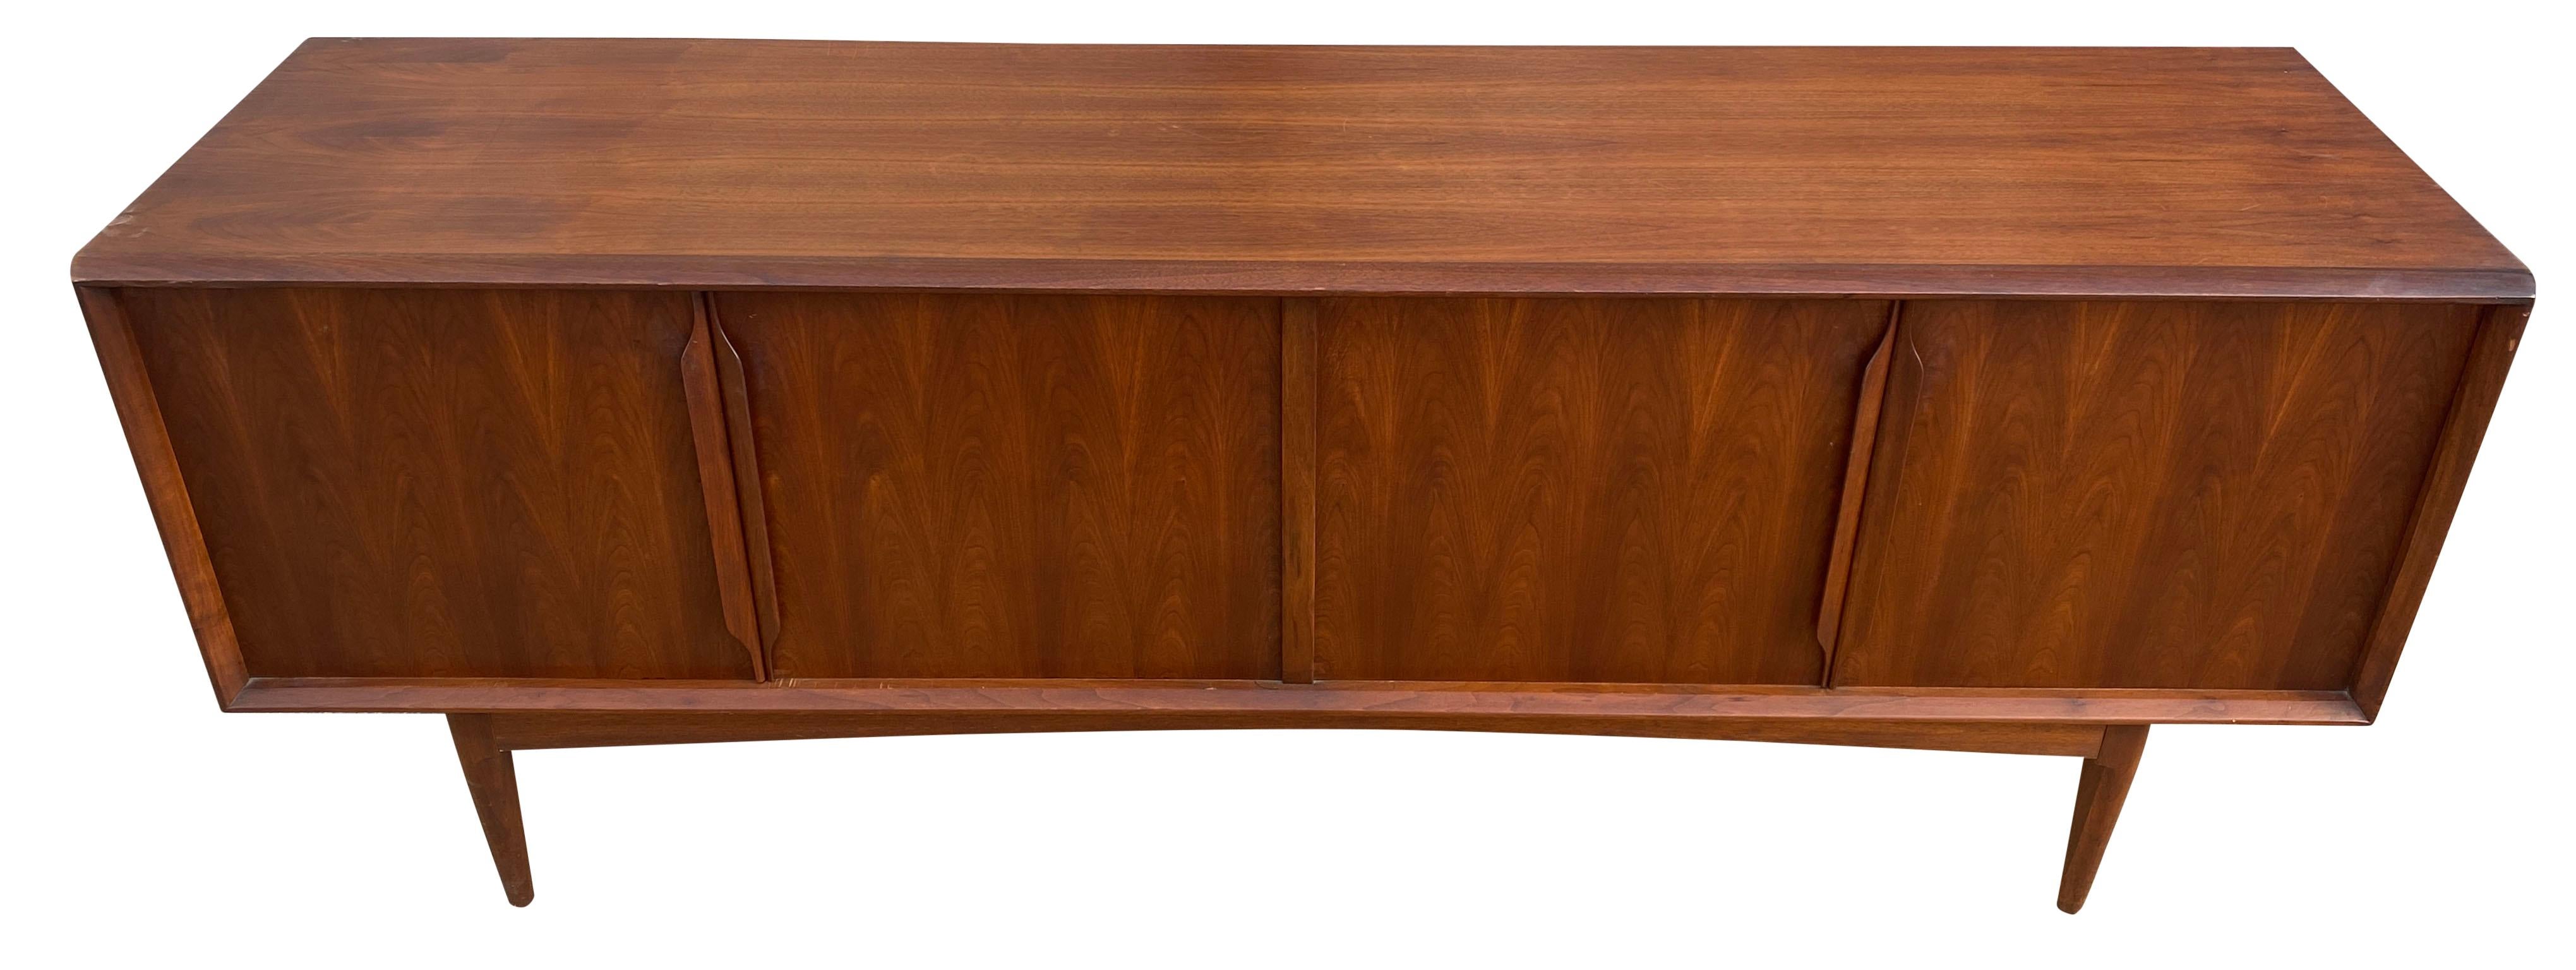 Stunning Bernhard Pedersen & Son midcentury long low Danish teak credenza sideboard with 4 doors and 3 drawers also has 3 adjustable shelves. High quality teak wood credenza with sculpted teak handles. Very clean midcentury Danish sideboard. Great